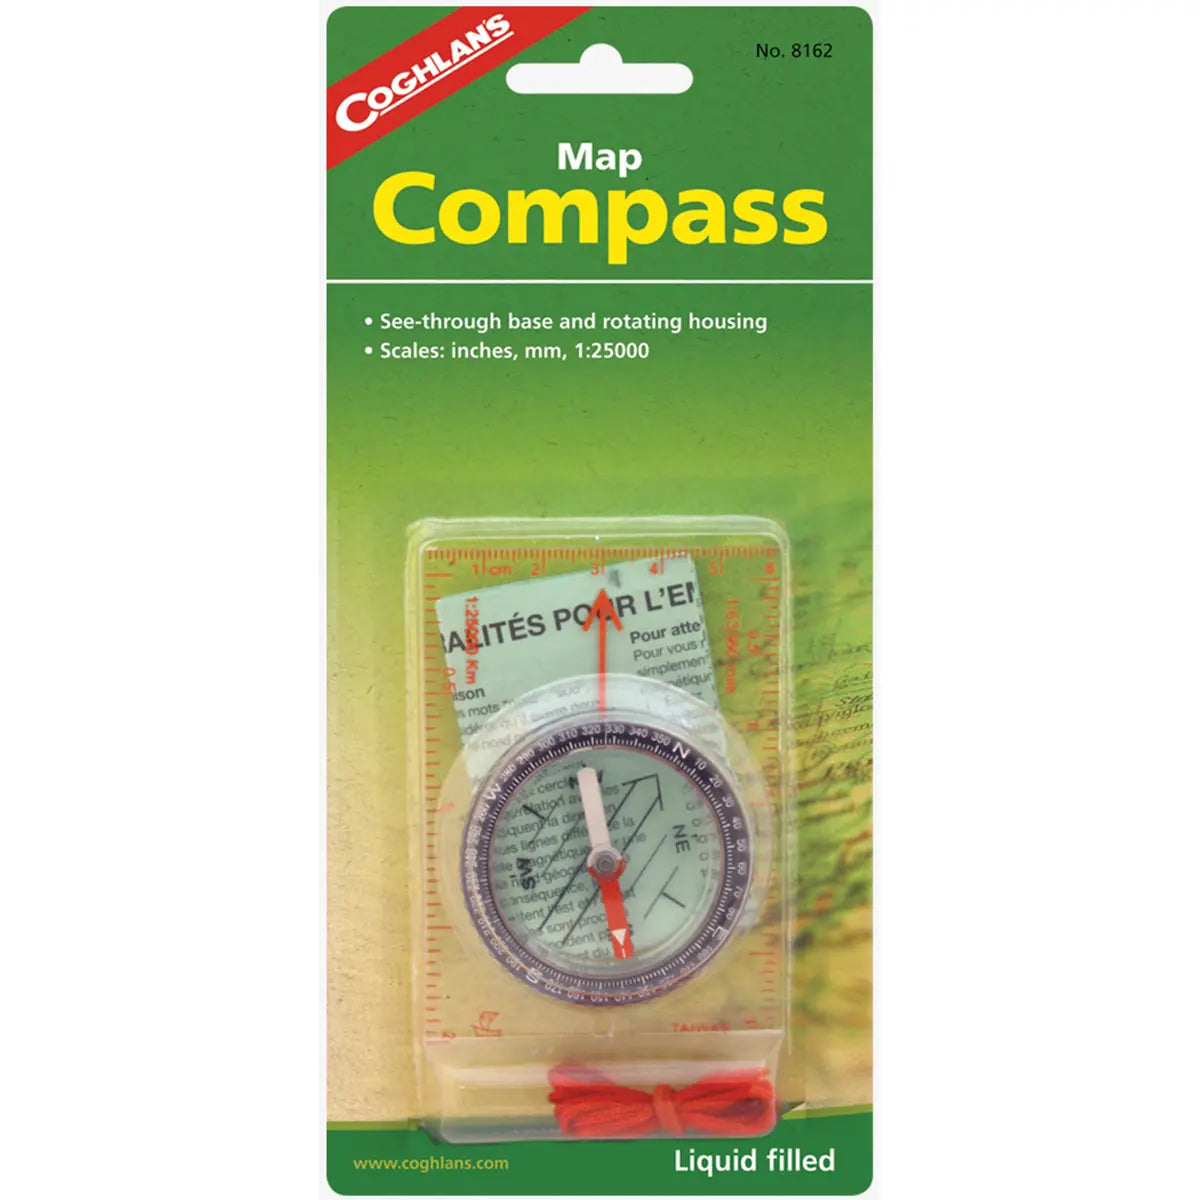 Coghlan's Map Compass, See-Through Base and Rotating Housing, Survival Emergency Coghlan's